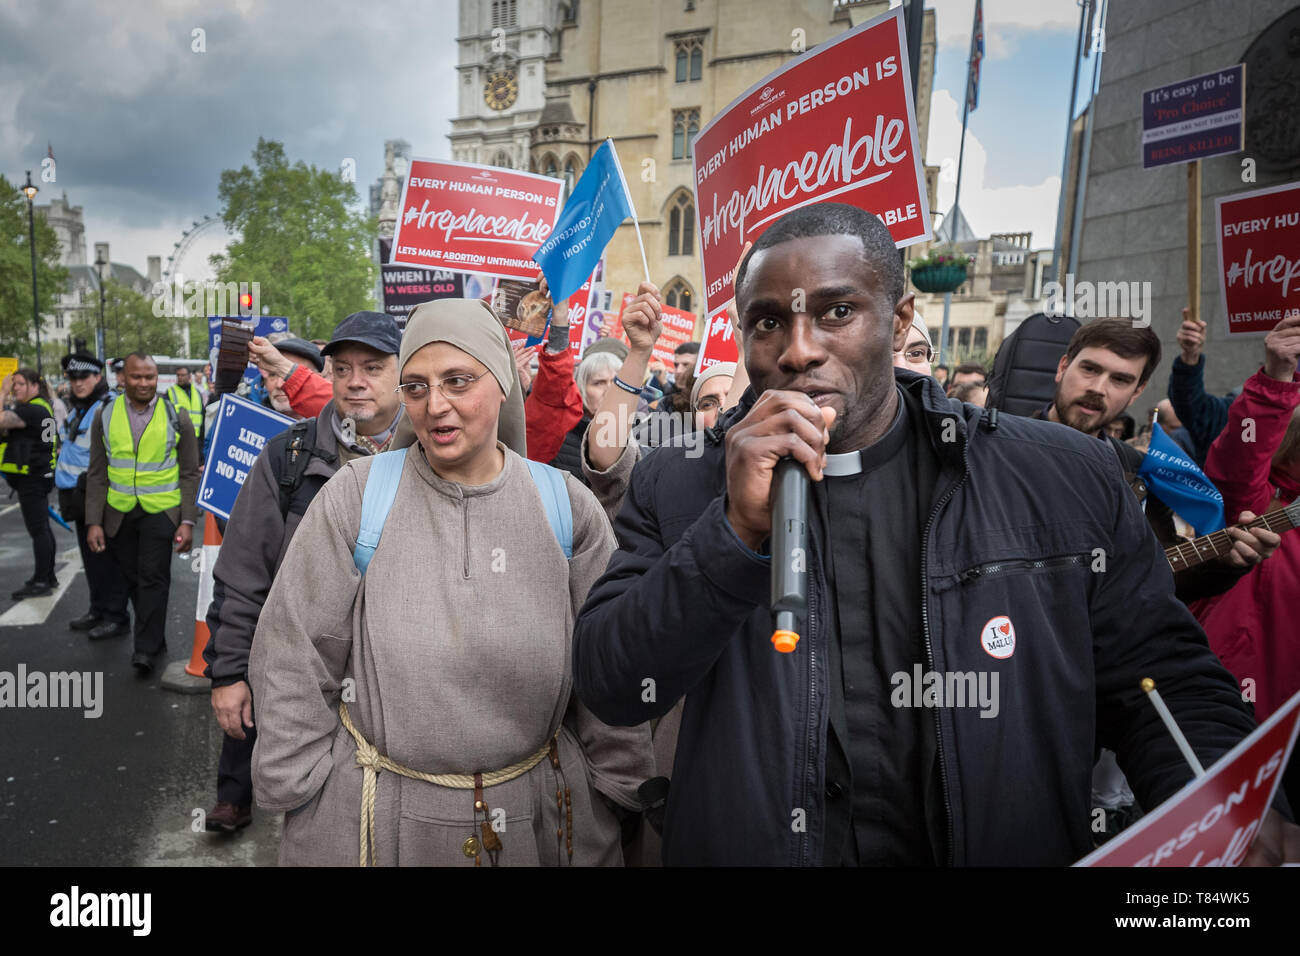 ‘March for Life UK’ anti-abortion protest march organised by pro-life Christian groups including The Good Counsel Network and March For Life UK. Stock Photo